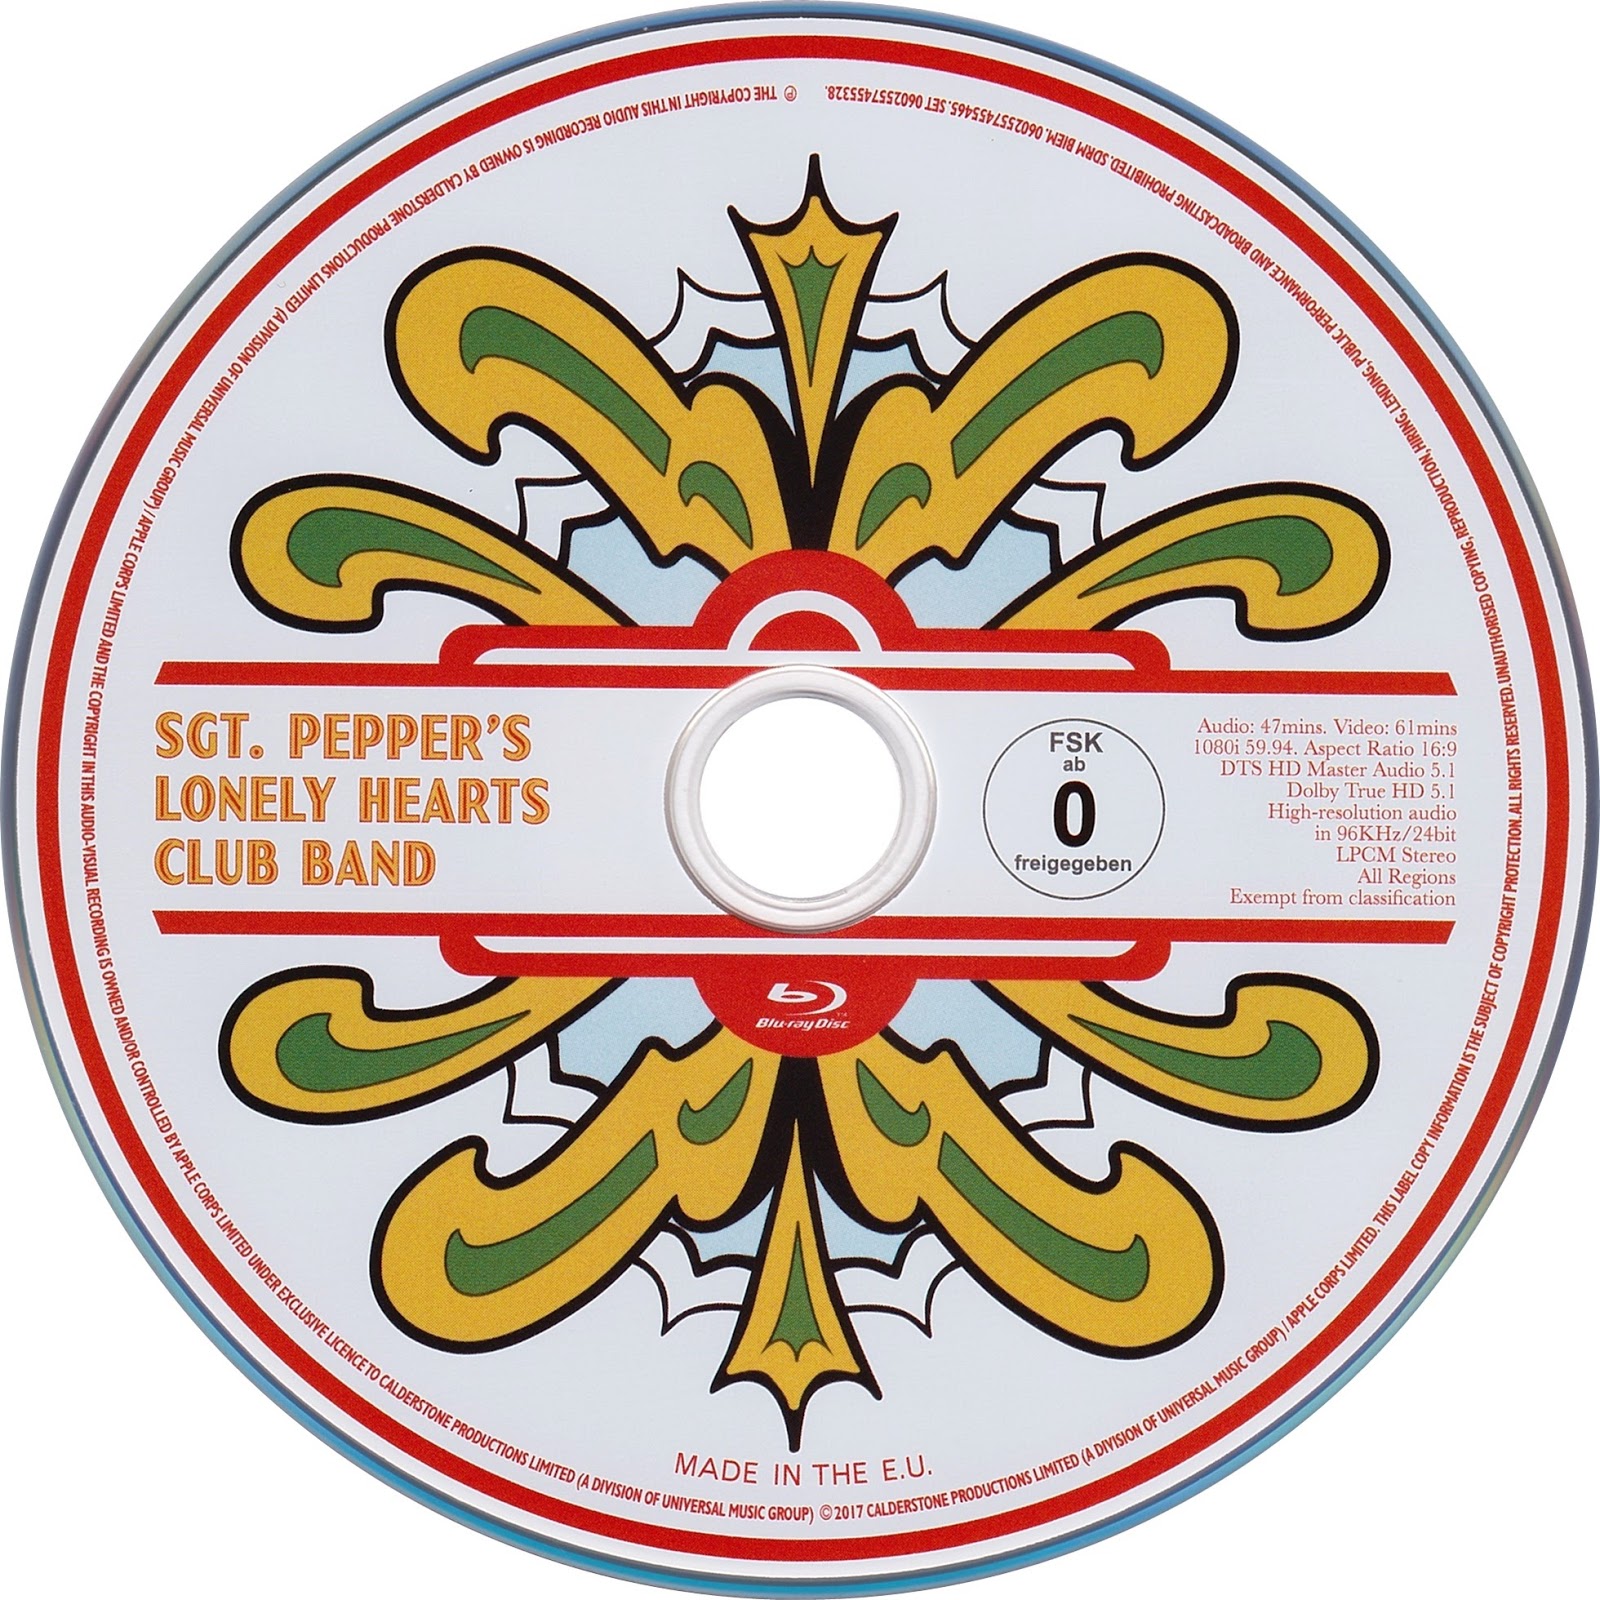 Beatles sgt pepper lonely. Sgt. Pepper's Lonely Hearts Club Band CD. Beatles Sergeant Pepper's Lonely Hearts Club Band. Битлз Sgt Pepper s Lonely Hearts Club Band. Beatles Sgt Pepper's Lonely Hearts Club Band CD.